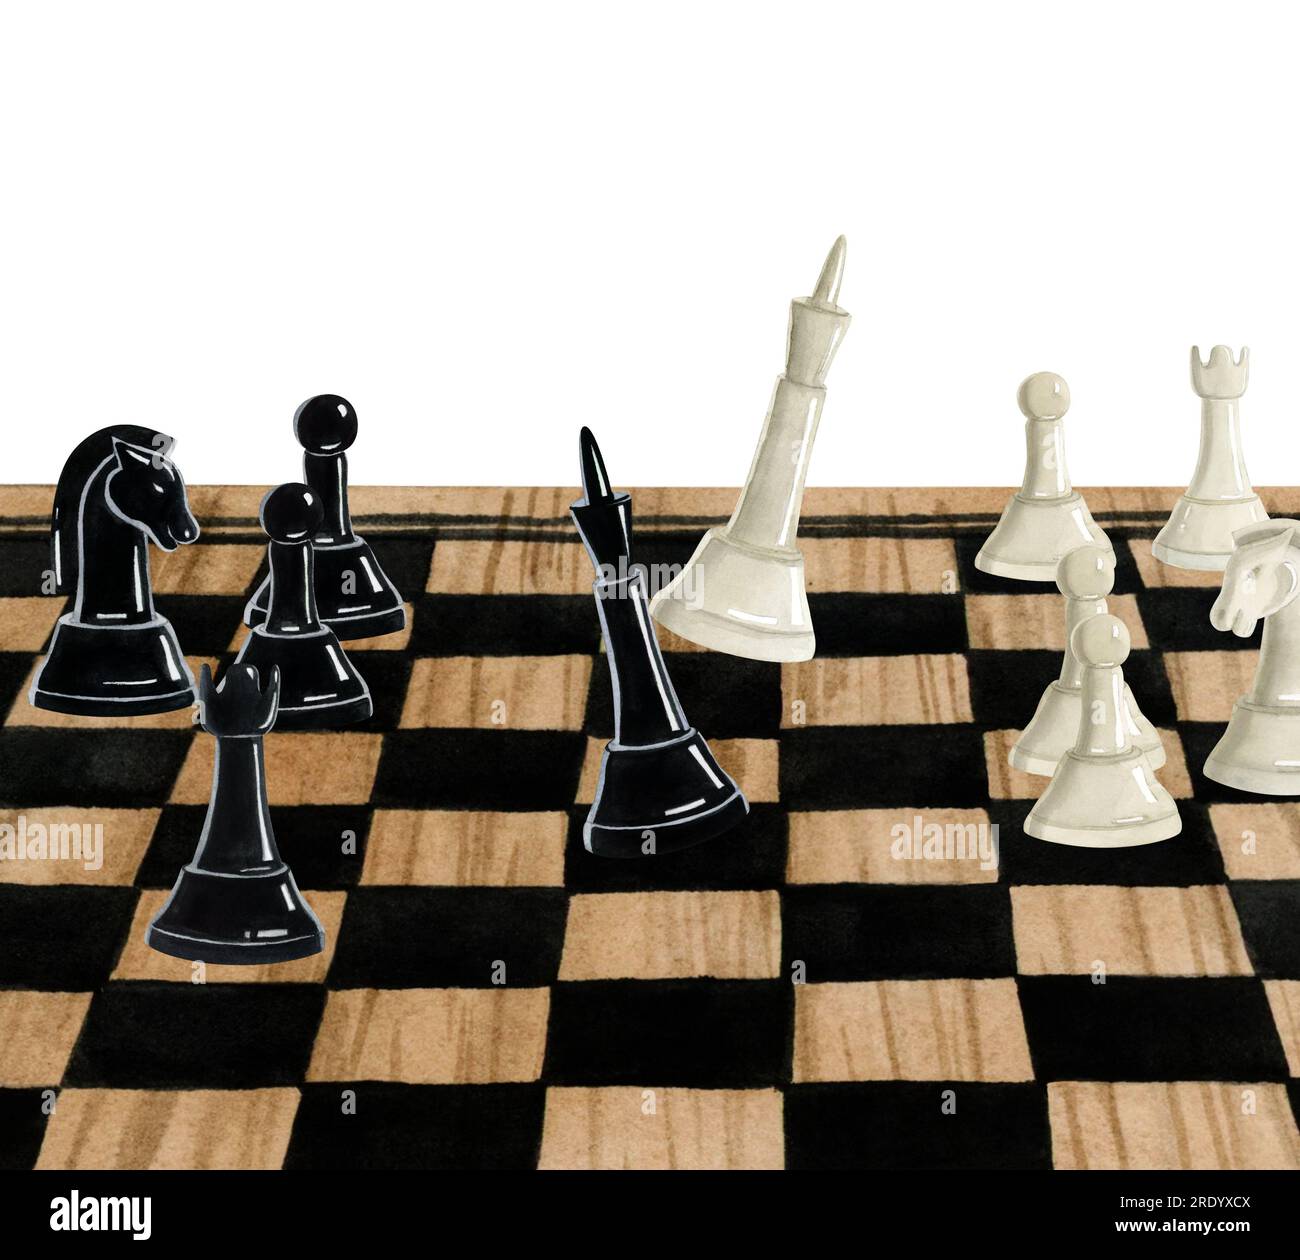 White chess king defeats black king on board during tournament watercolor illustration for checkmate game designs Stock Photo